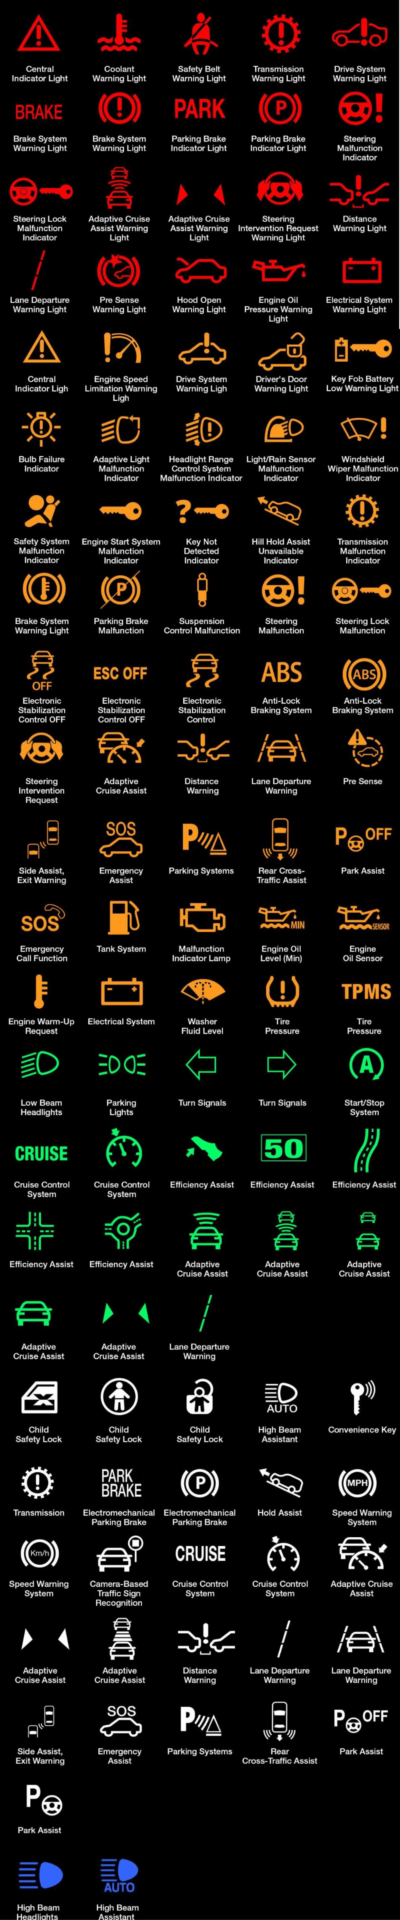 Toyota Tacoma dashboard symbols and meanings